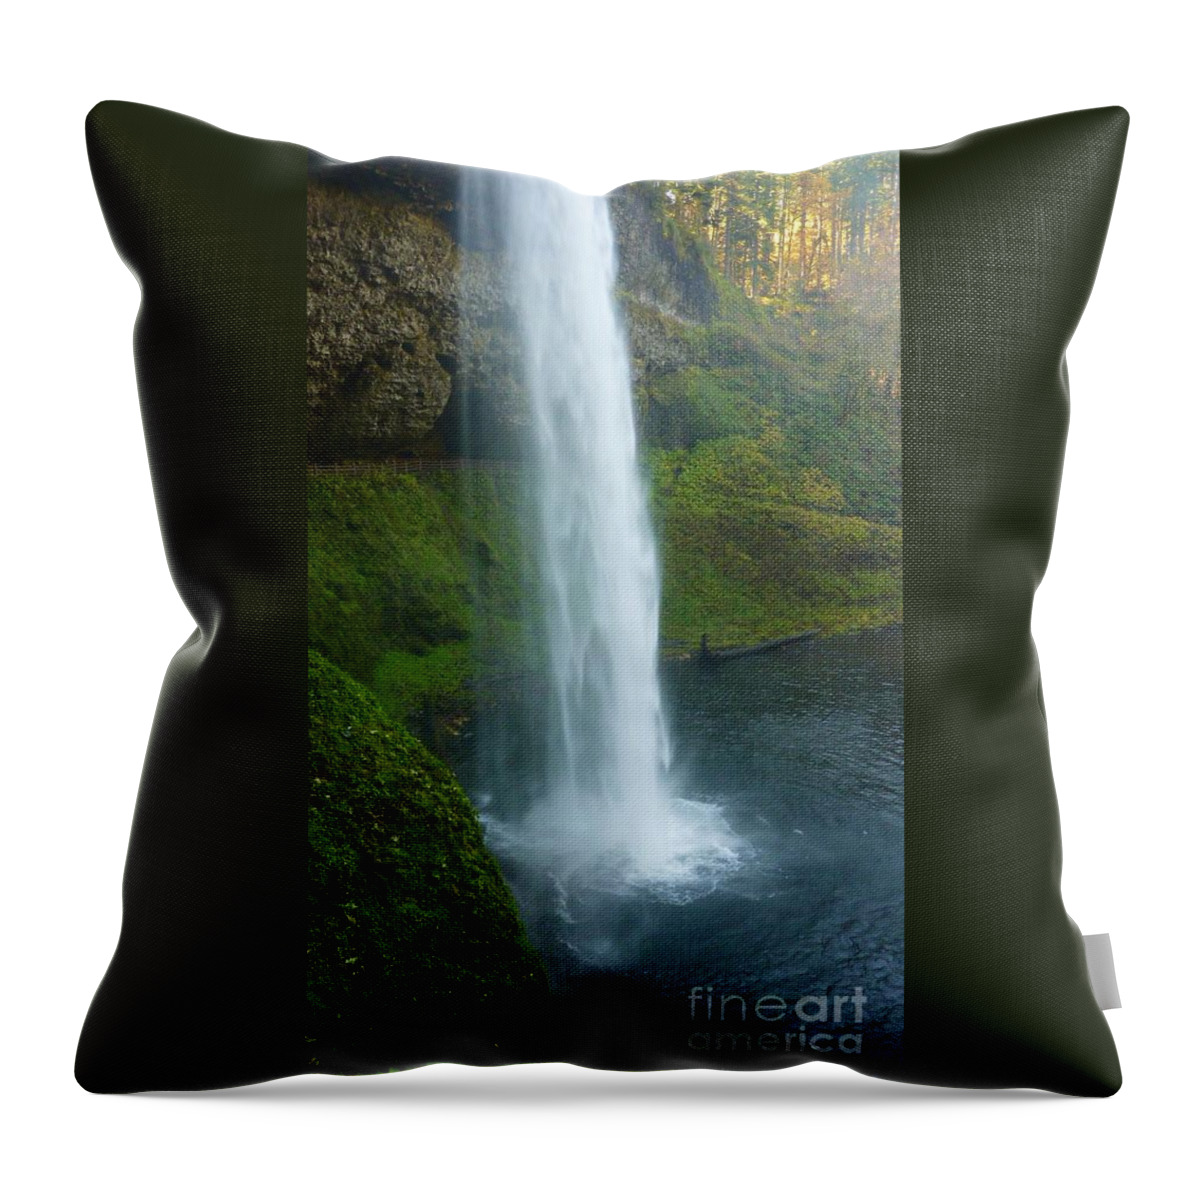 Fall In The Forest Throw Pillow featuring the photograph Waterfall View by Susan Garren